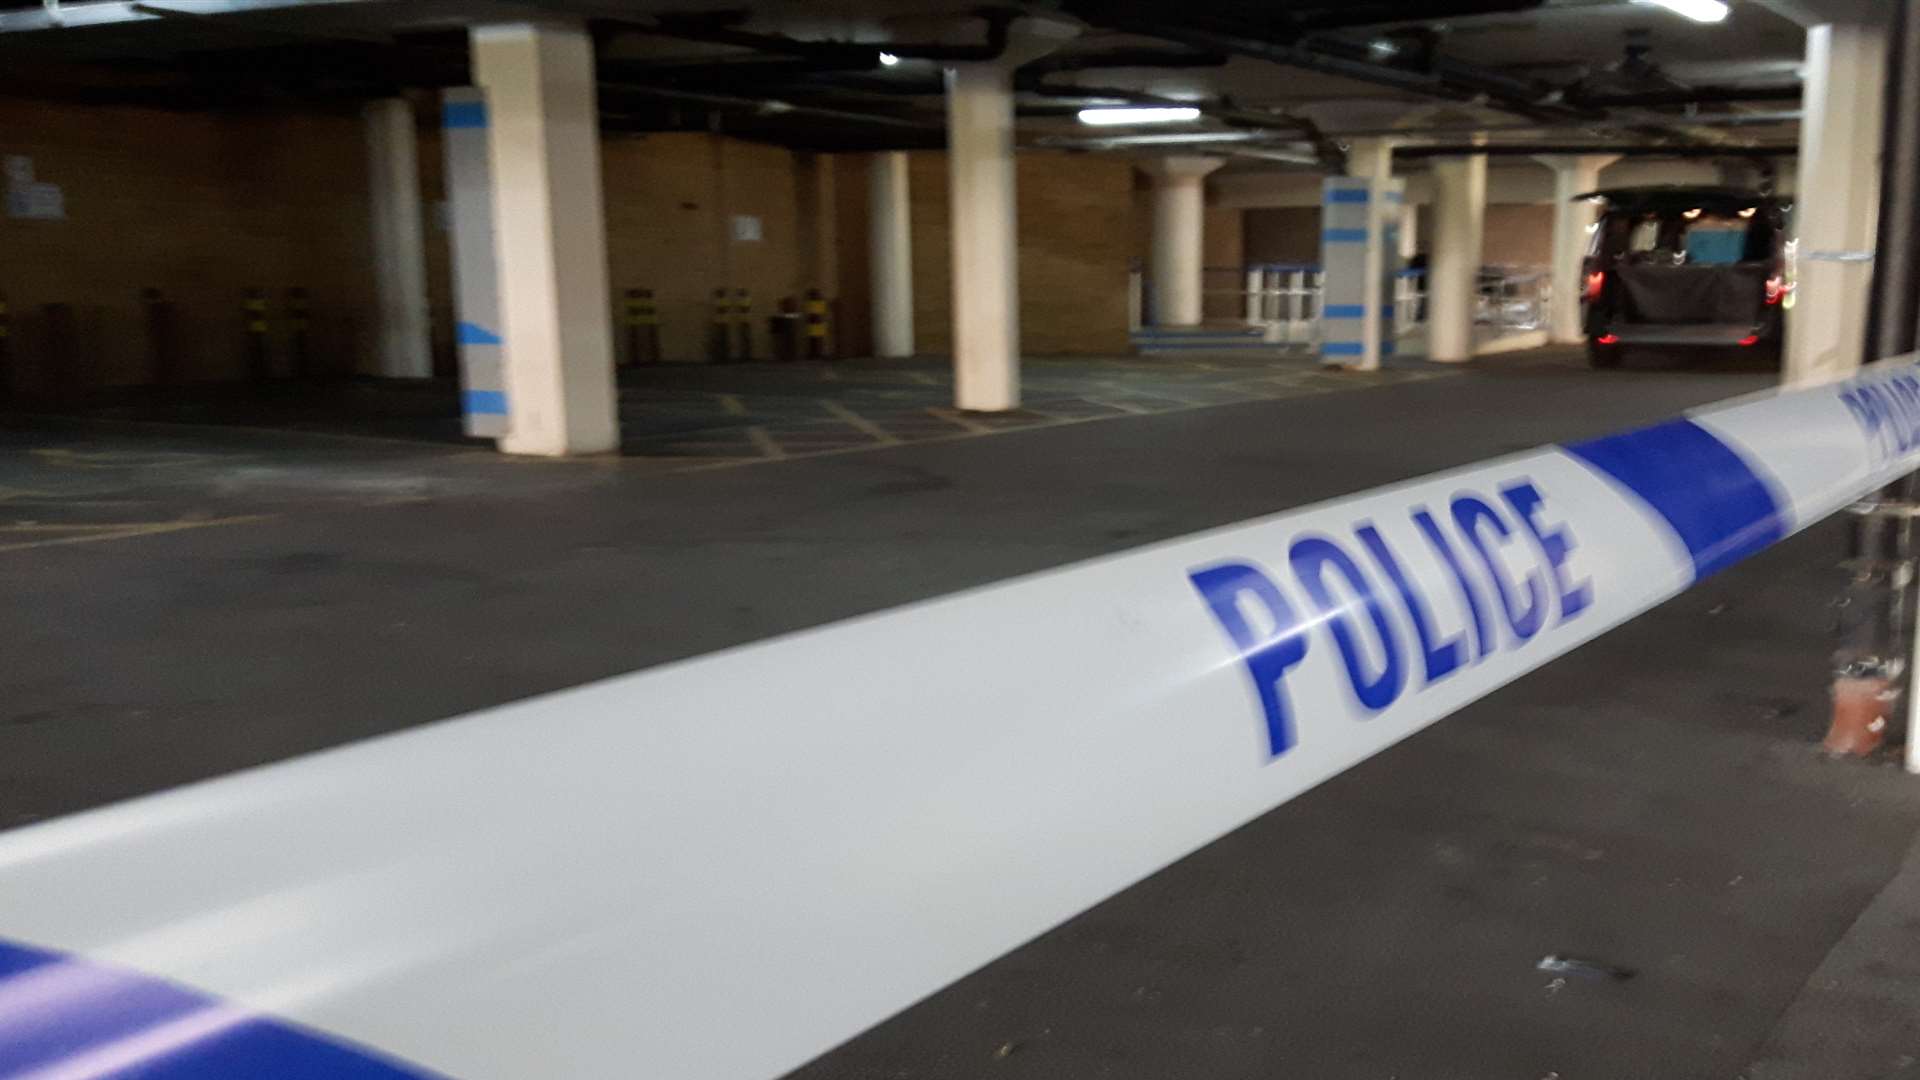 Mr Brady's body was found at the Stour Centre car park in Ashford